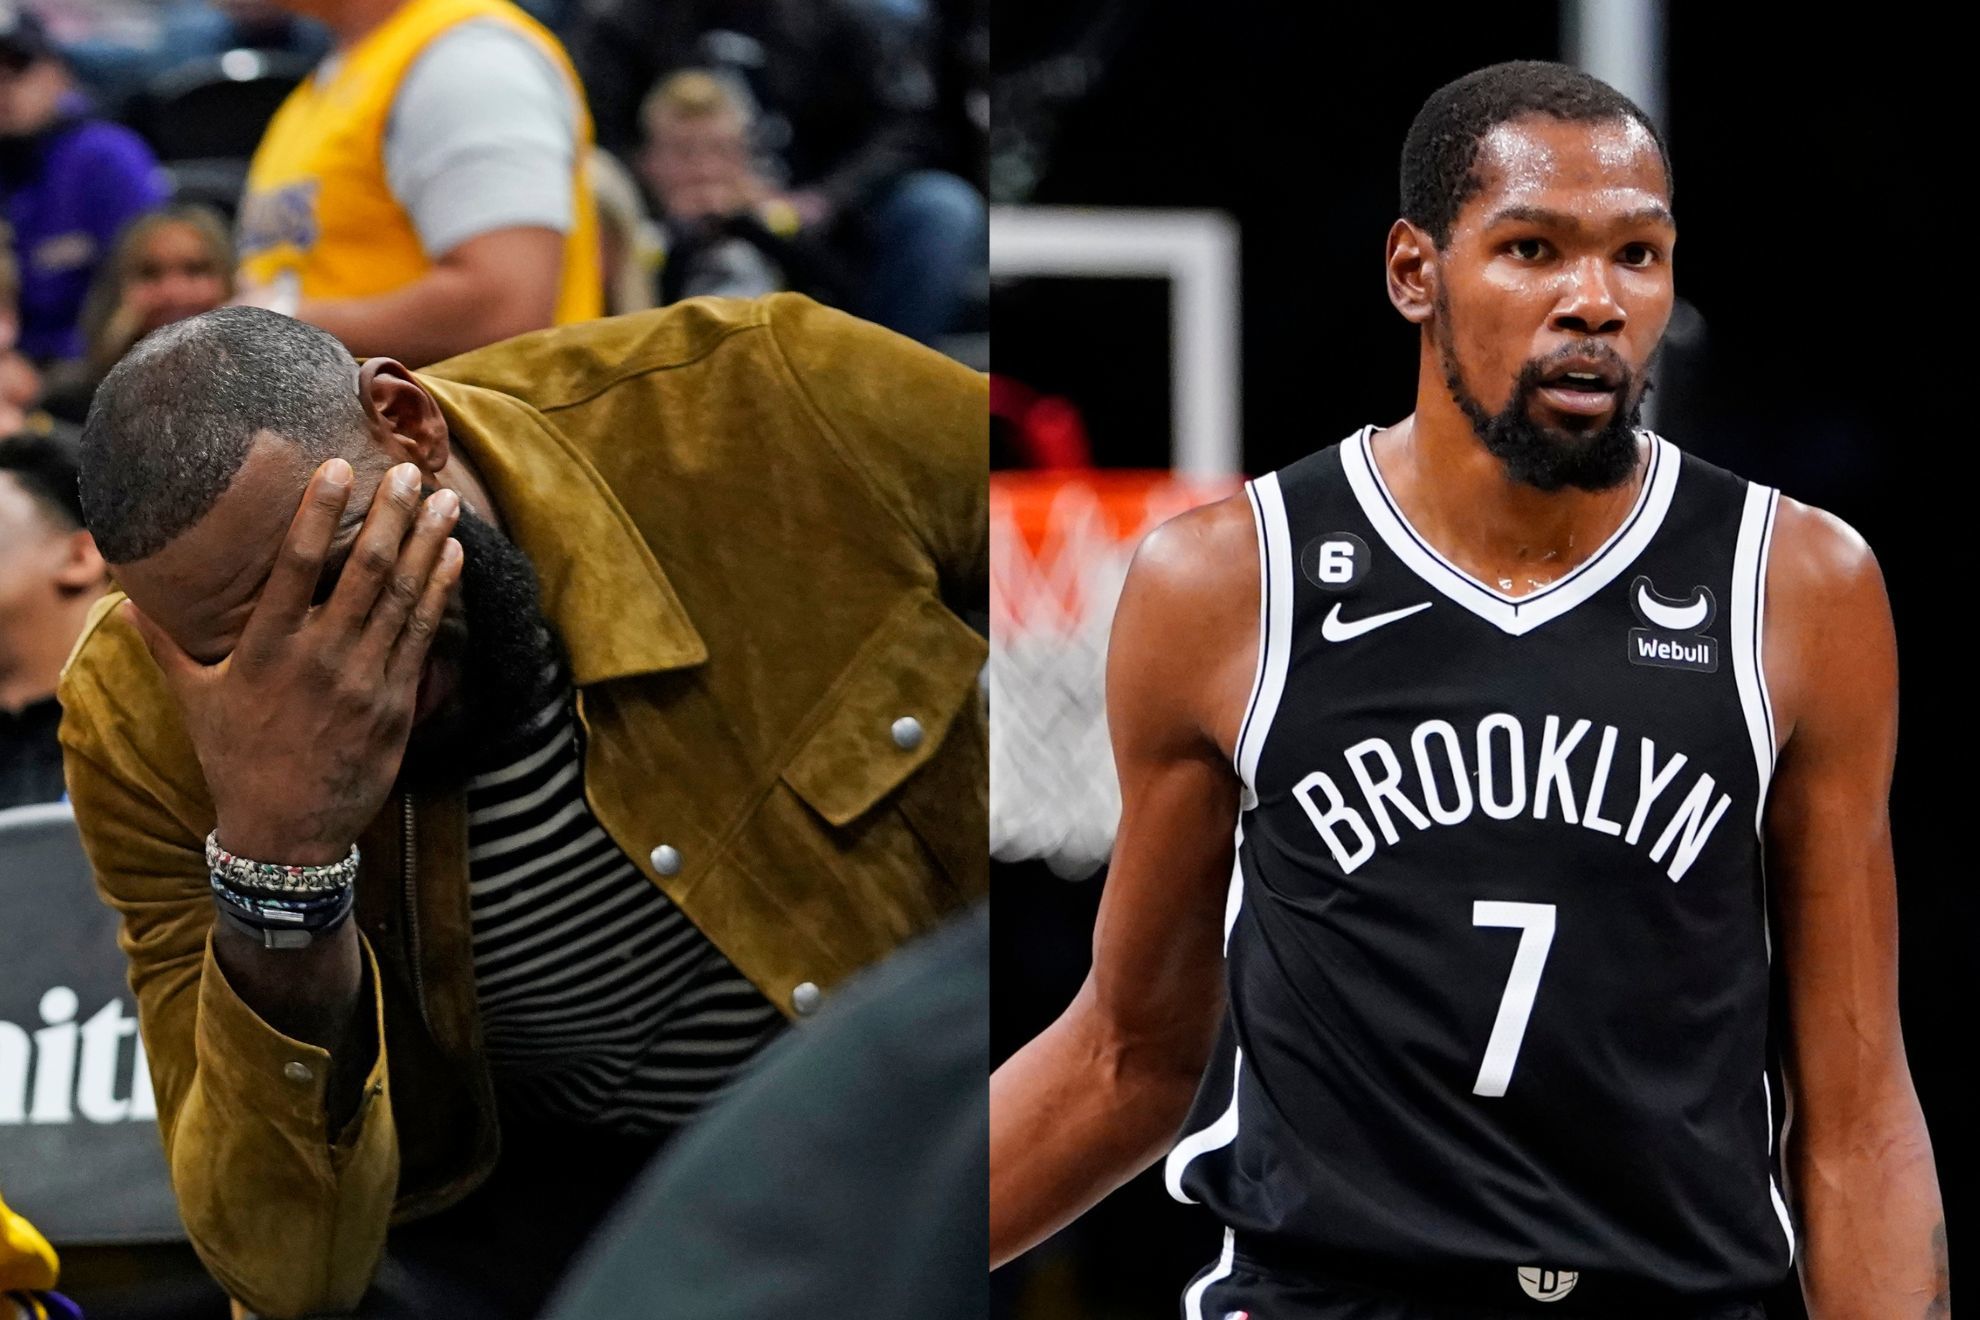 LeBron James, Los Angeles Lakers (left) and Kevin Durant, Brooklyn Nets (right)